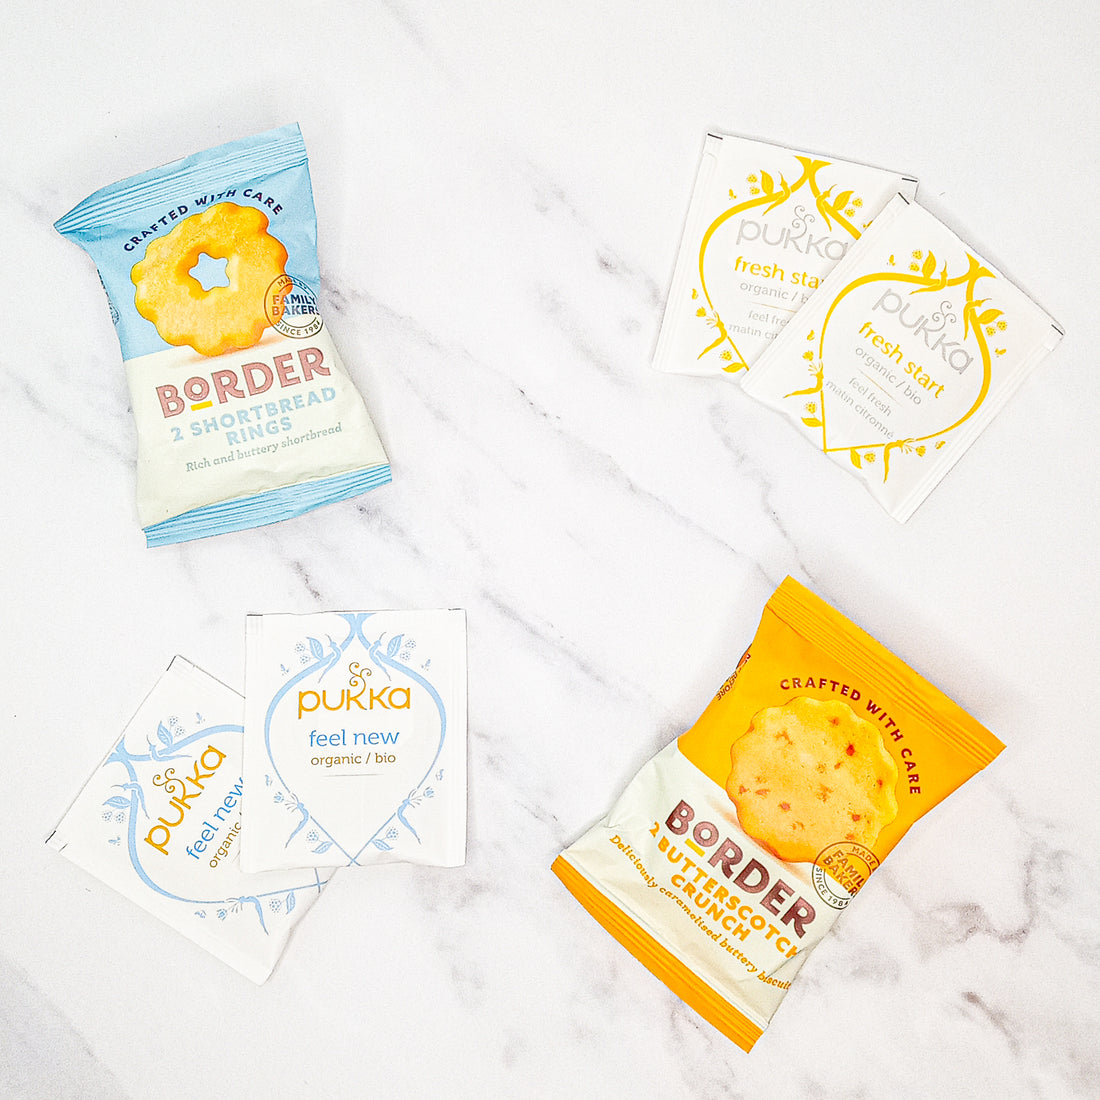 Luxurious snacks and herbal tea for a new Mum